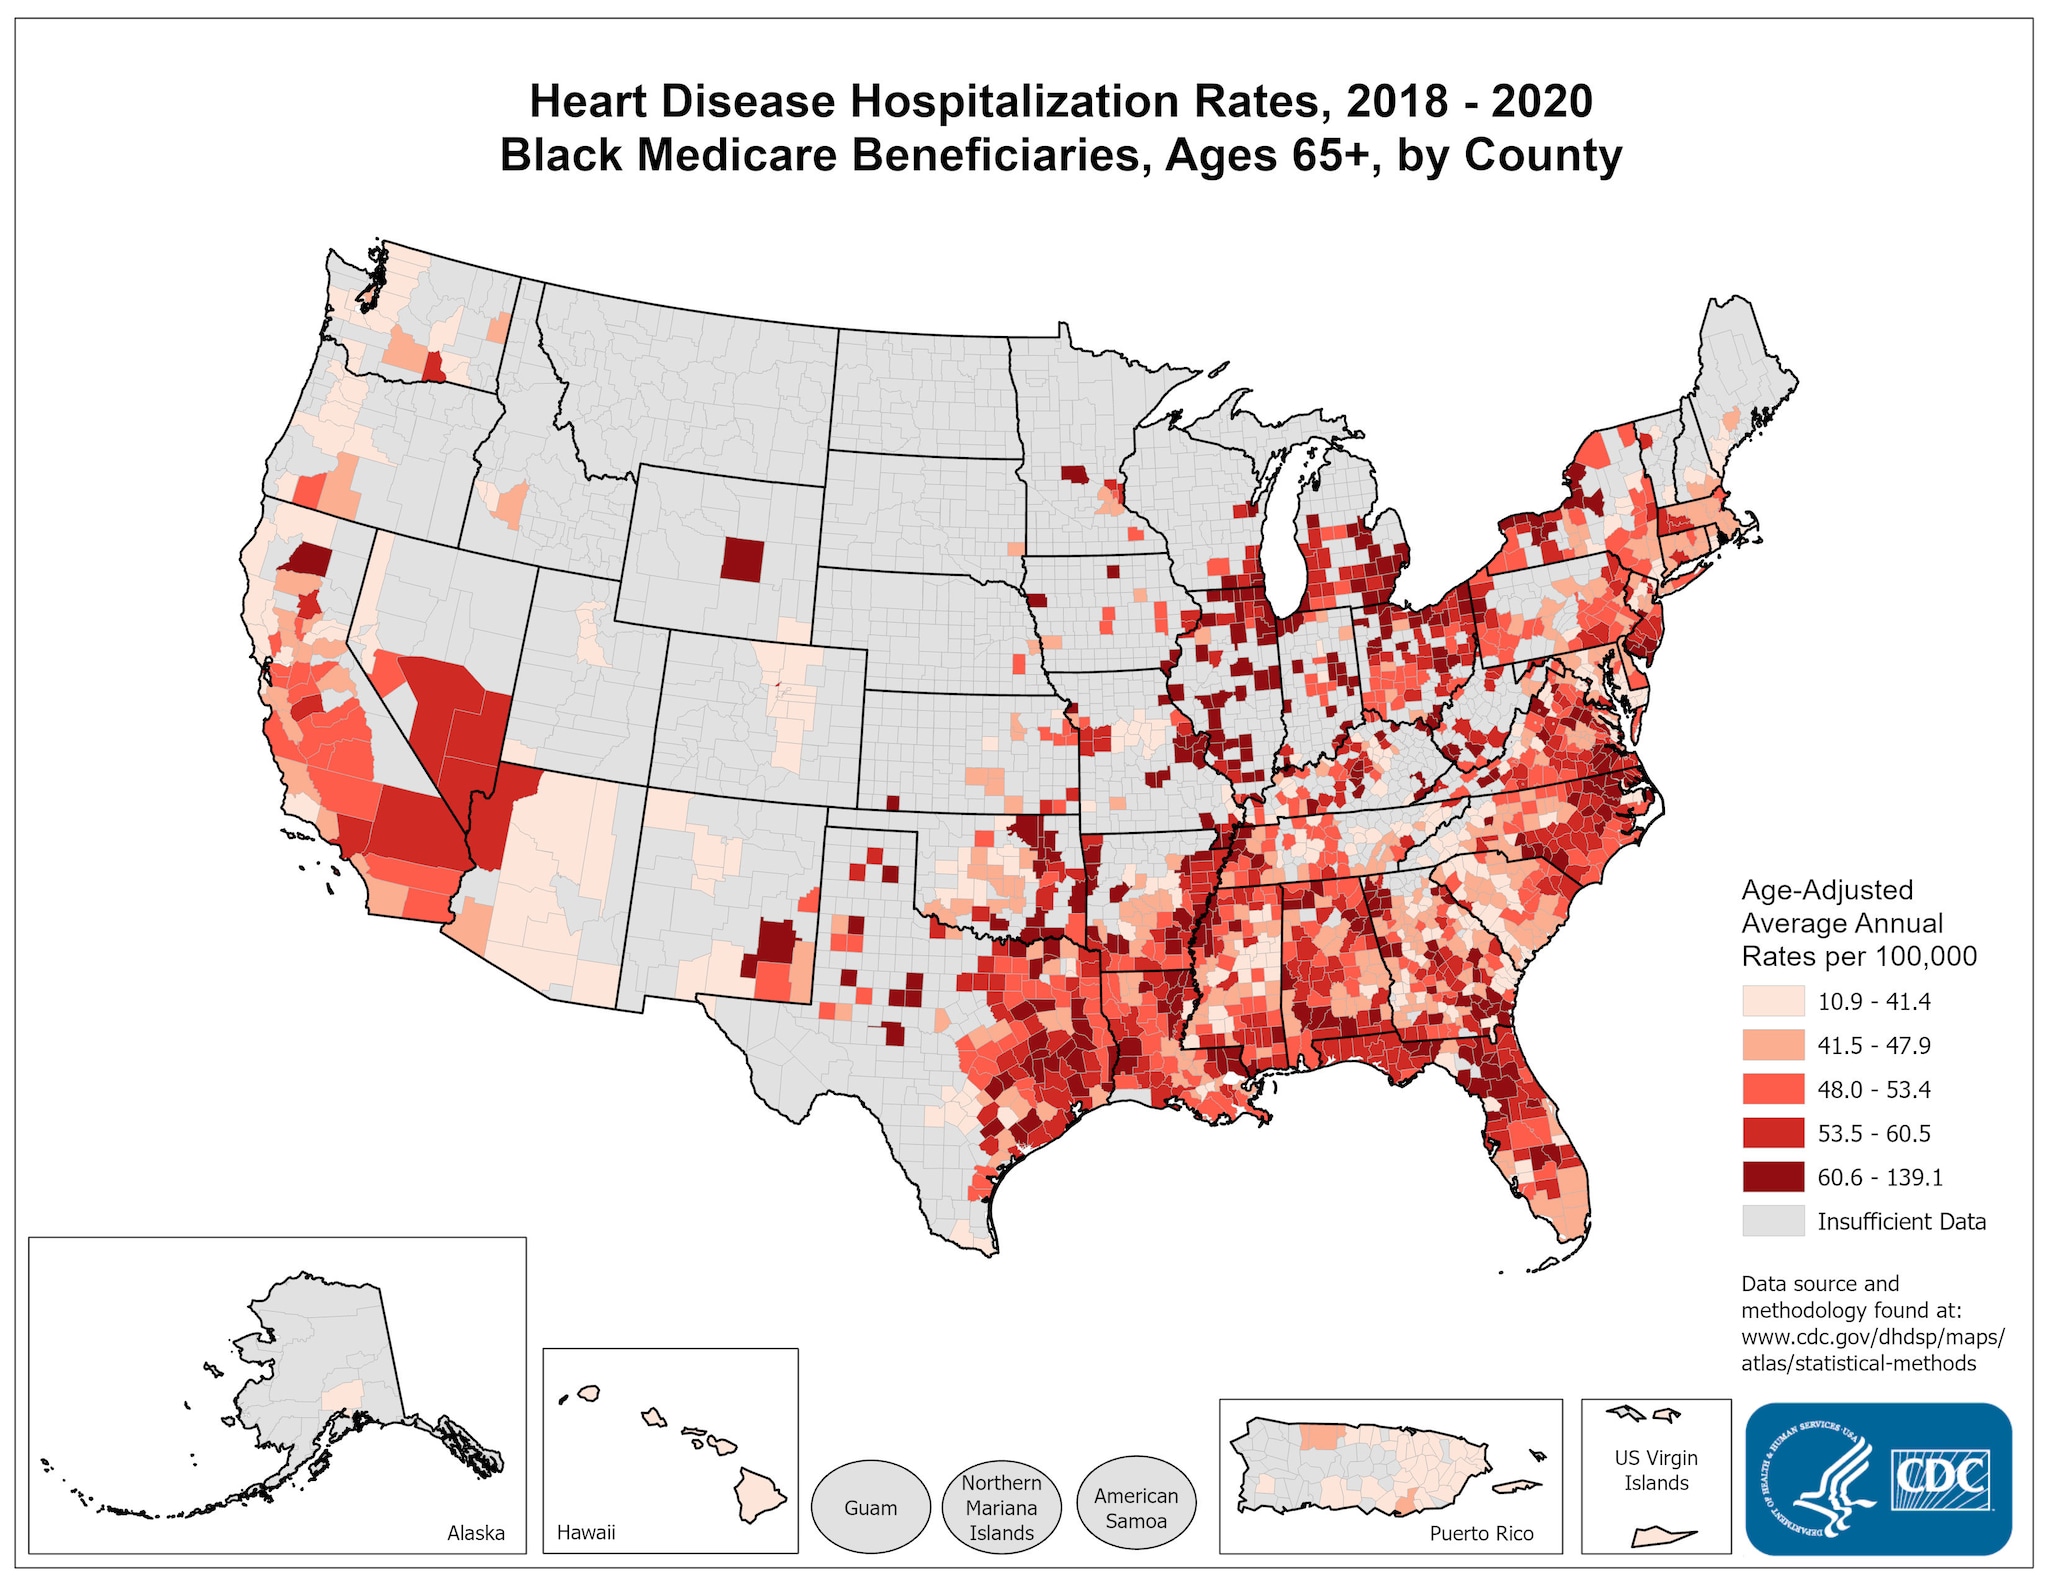 Heart Disease Hospitalization Rates for 2018 through 2020 for Blacks Aged 65 Years and Older by County